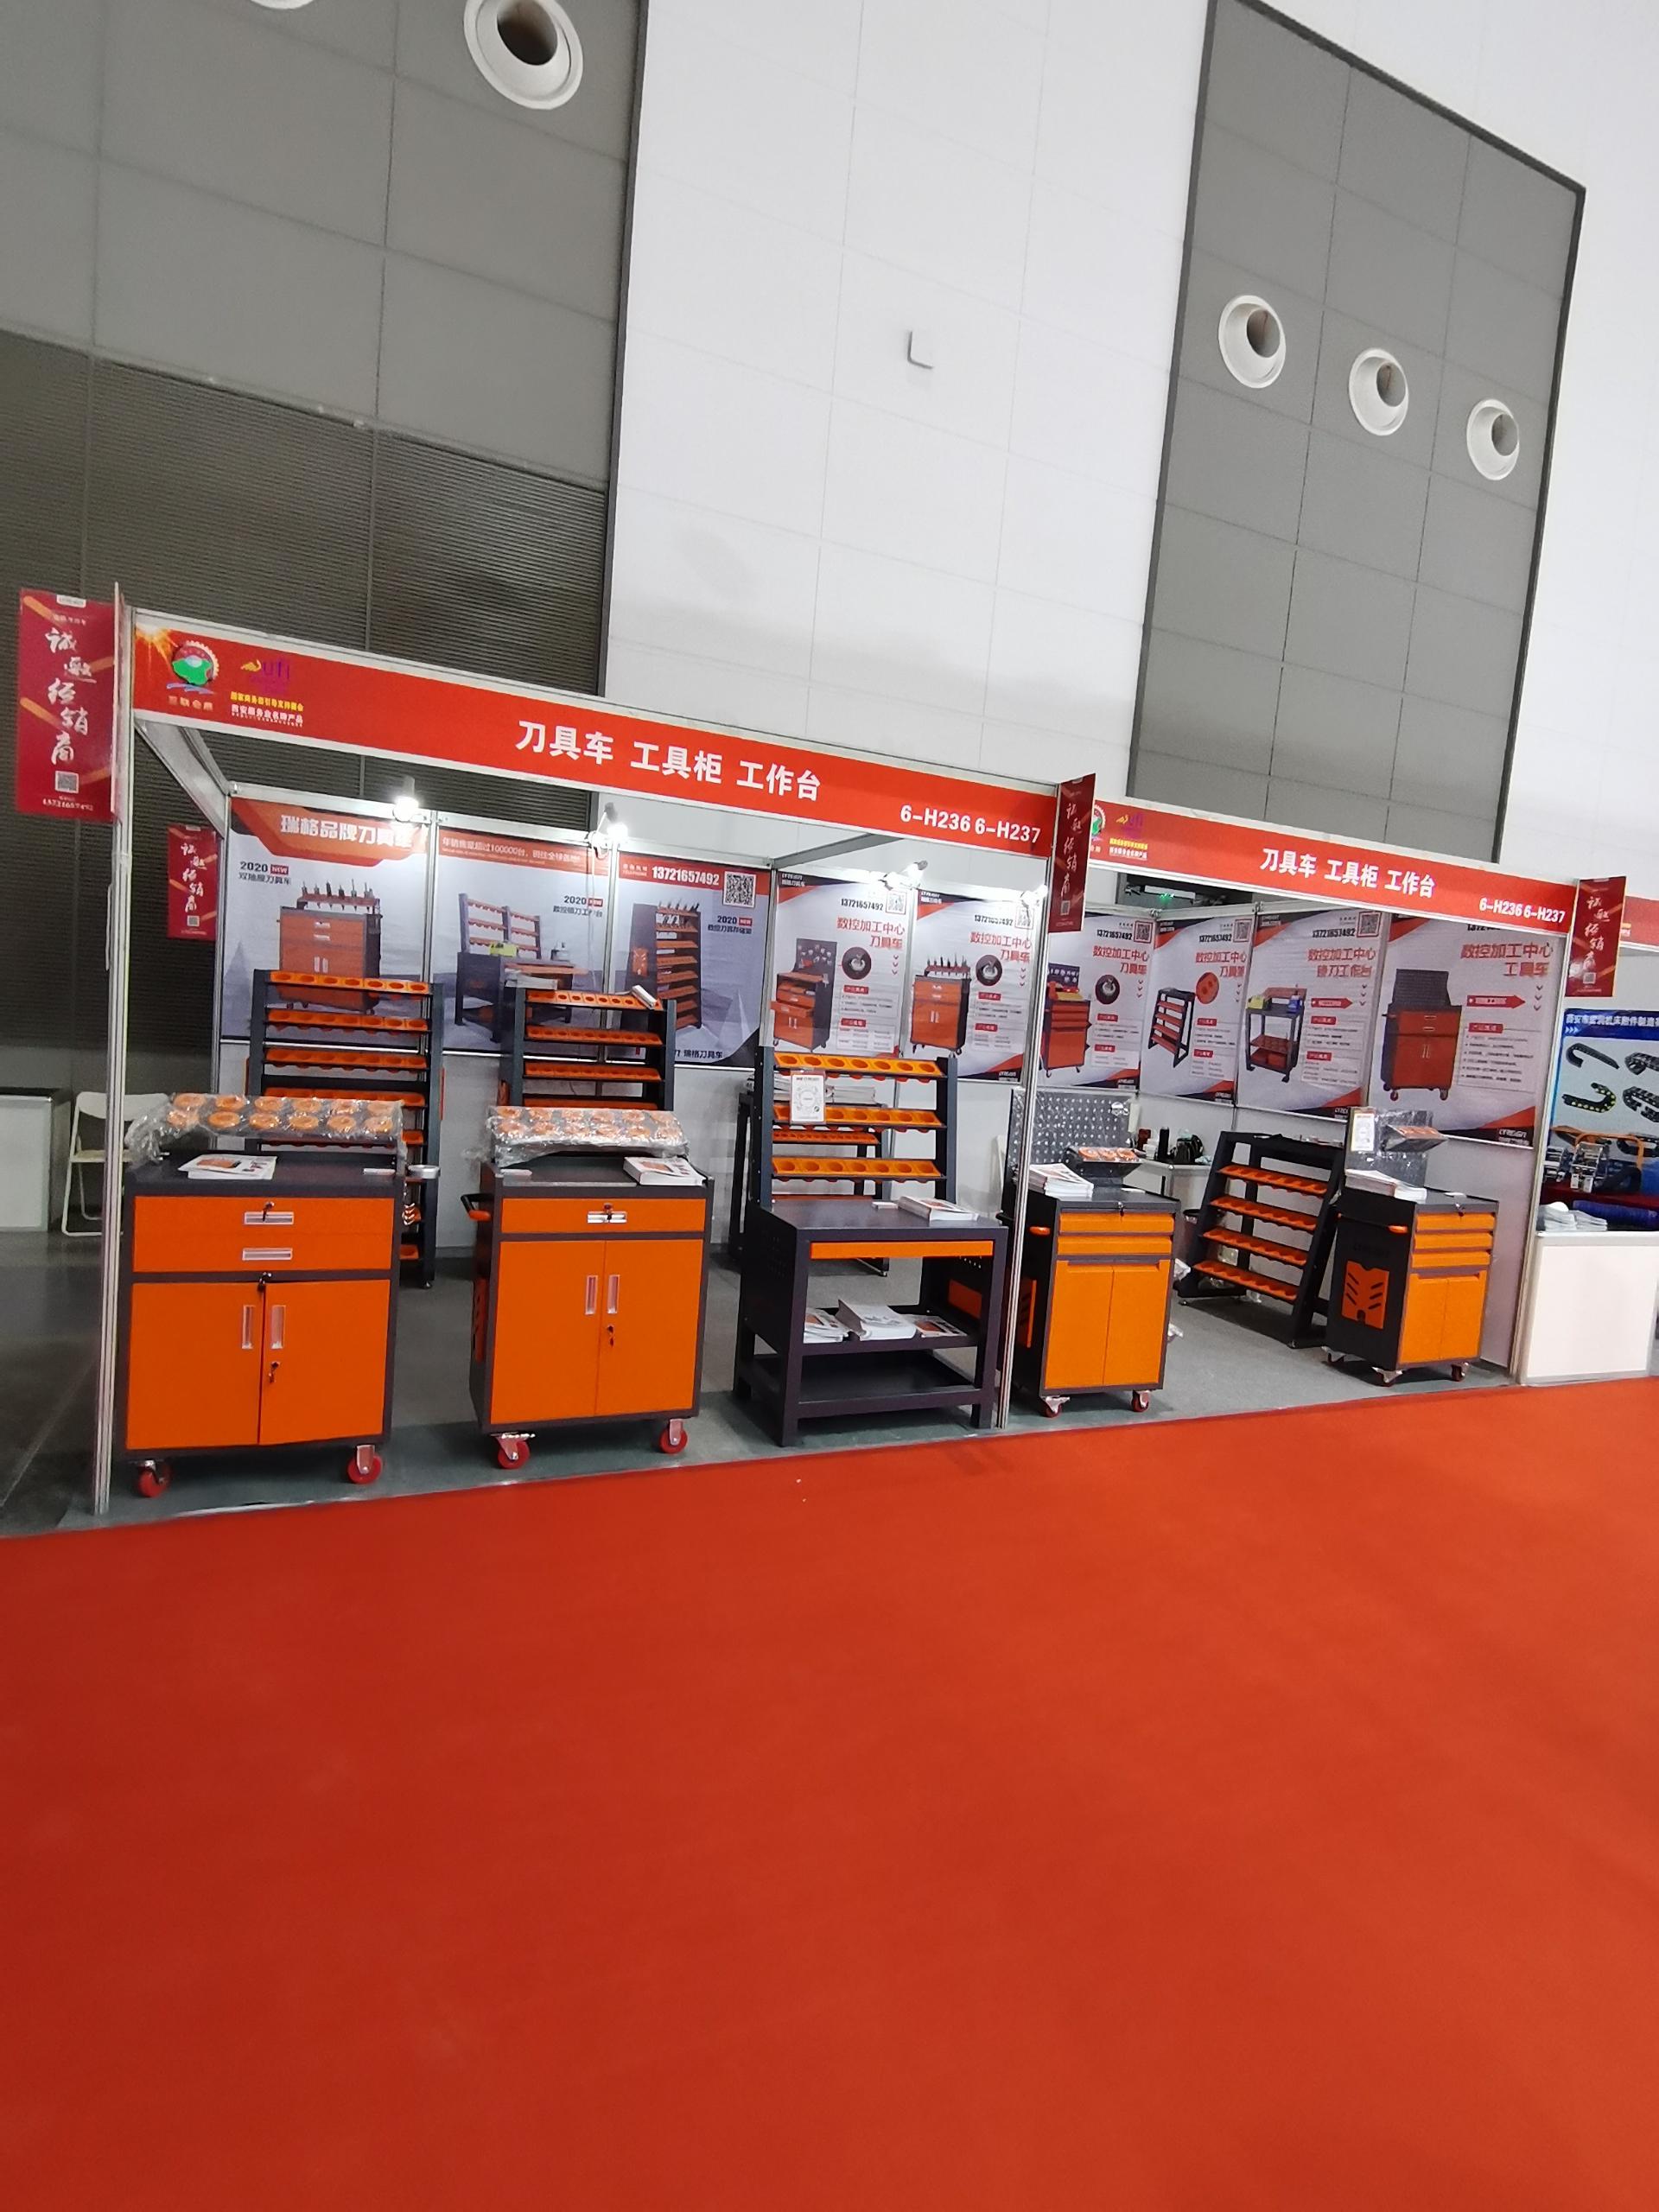 Xi 'an 2021 29th China West International Equipment Manufacturing Expo